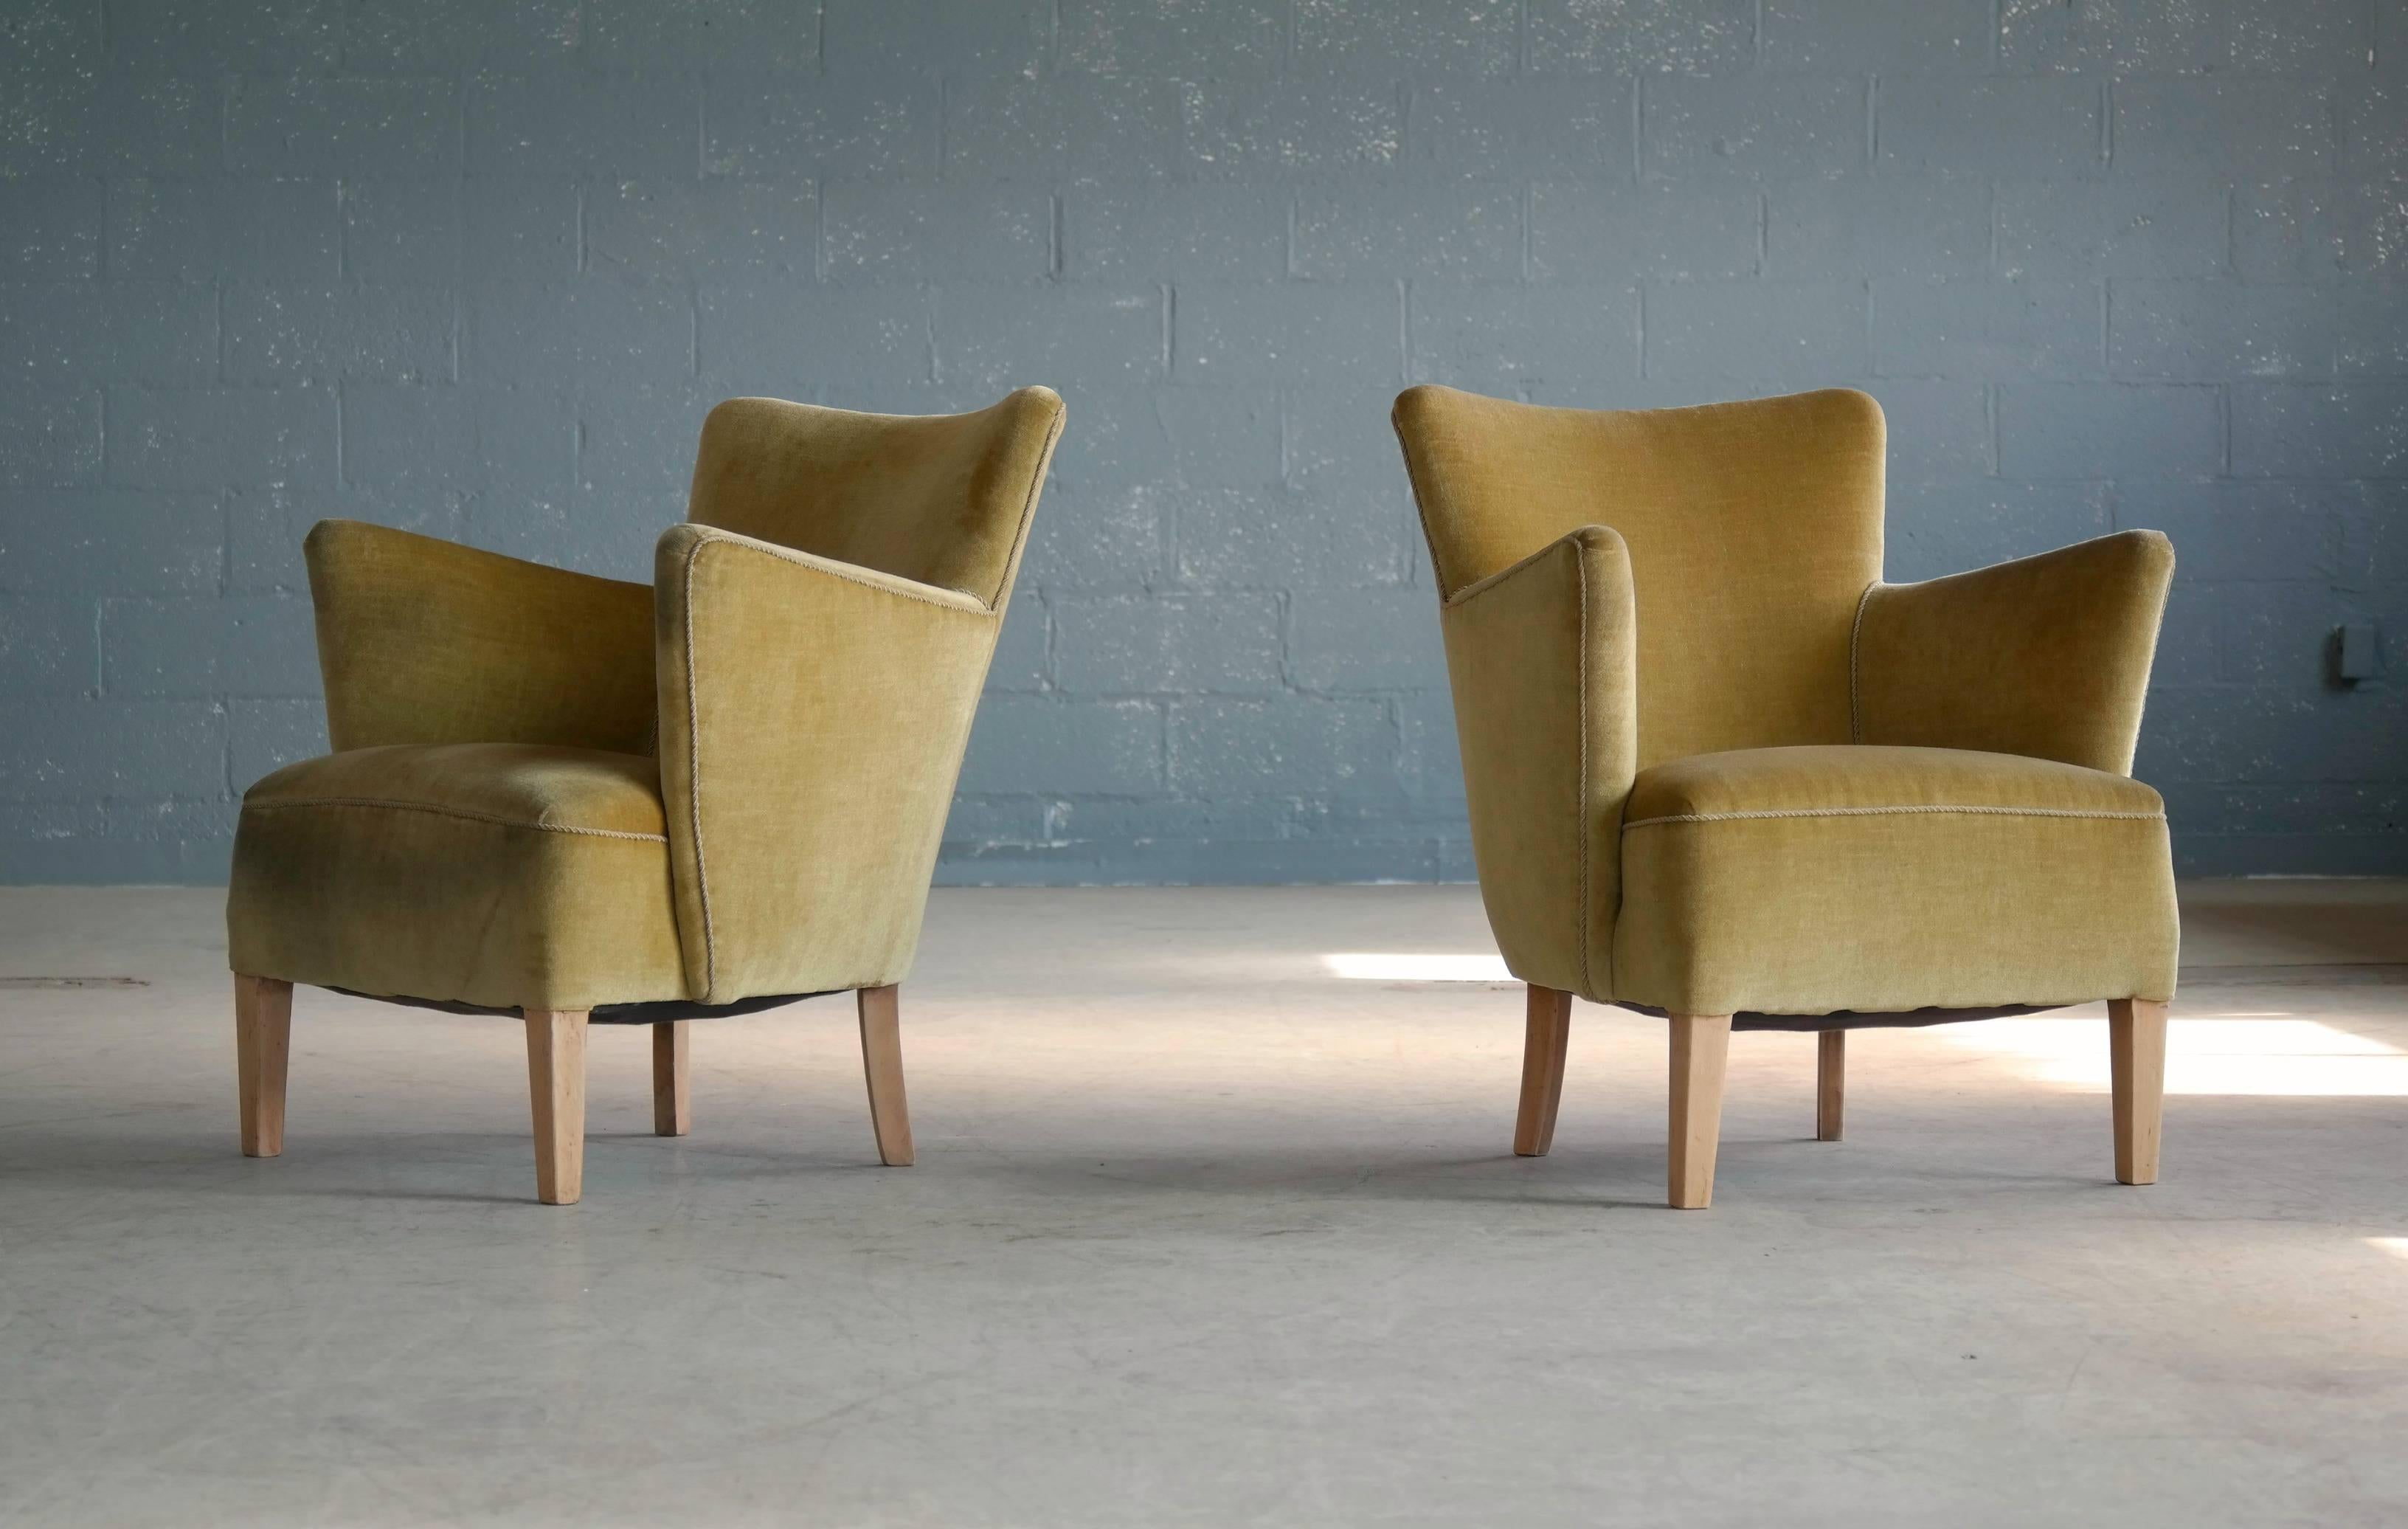 Very stylish and charming pair of small-scale 1950s lounge chairs in the style of Fritz Hansen and Ole Wanscher. The elegant dynamic lines evokes comparisons to Fritz Hansen's famous Variant 1669 chairs. The smaller scale make them less overwhelming